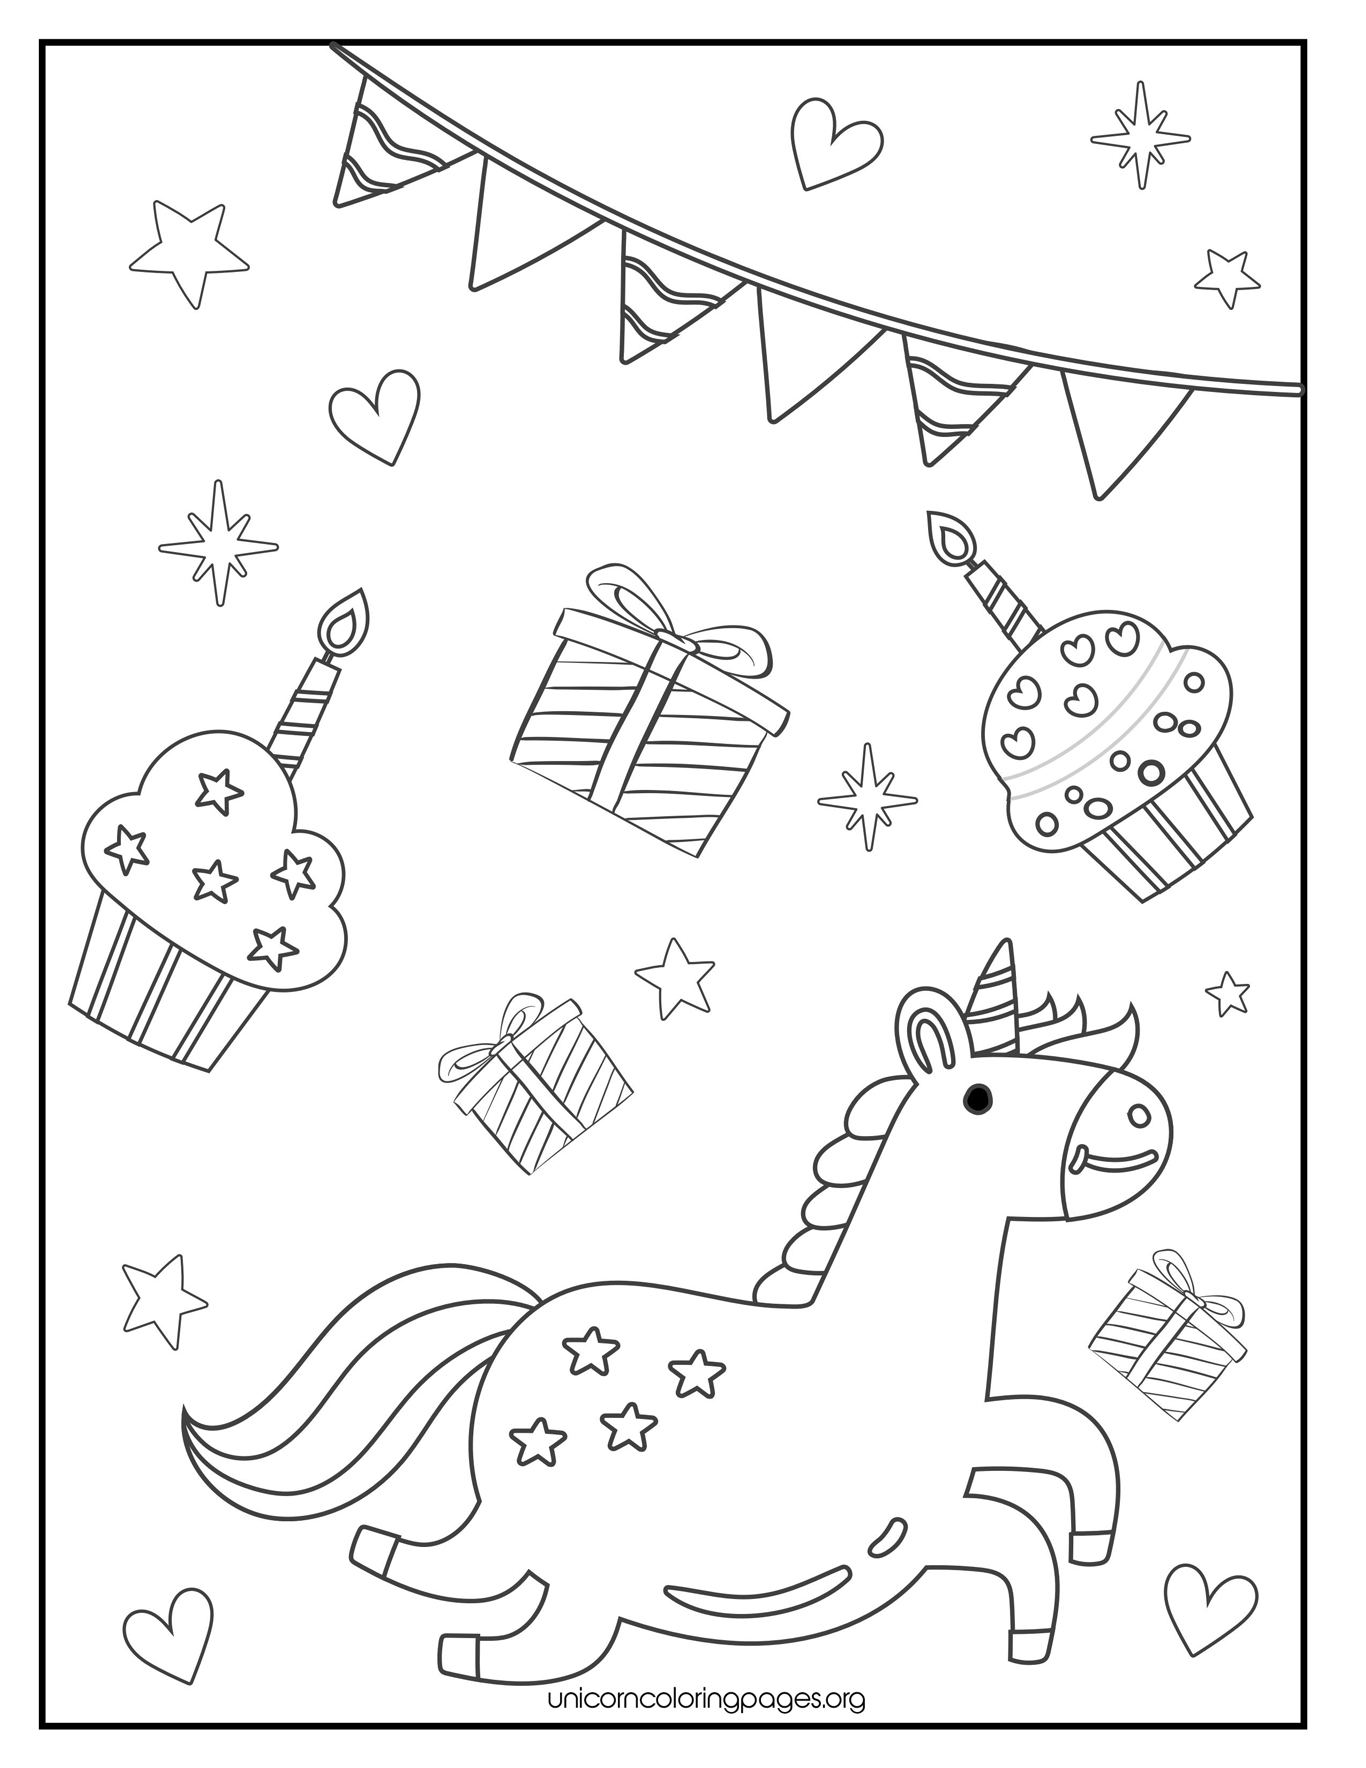 Free Unicorn Coloring Pages Printable PDF, Cute Little Baby Unicorn